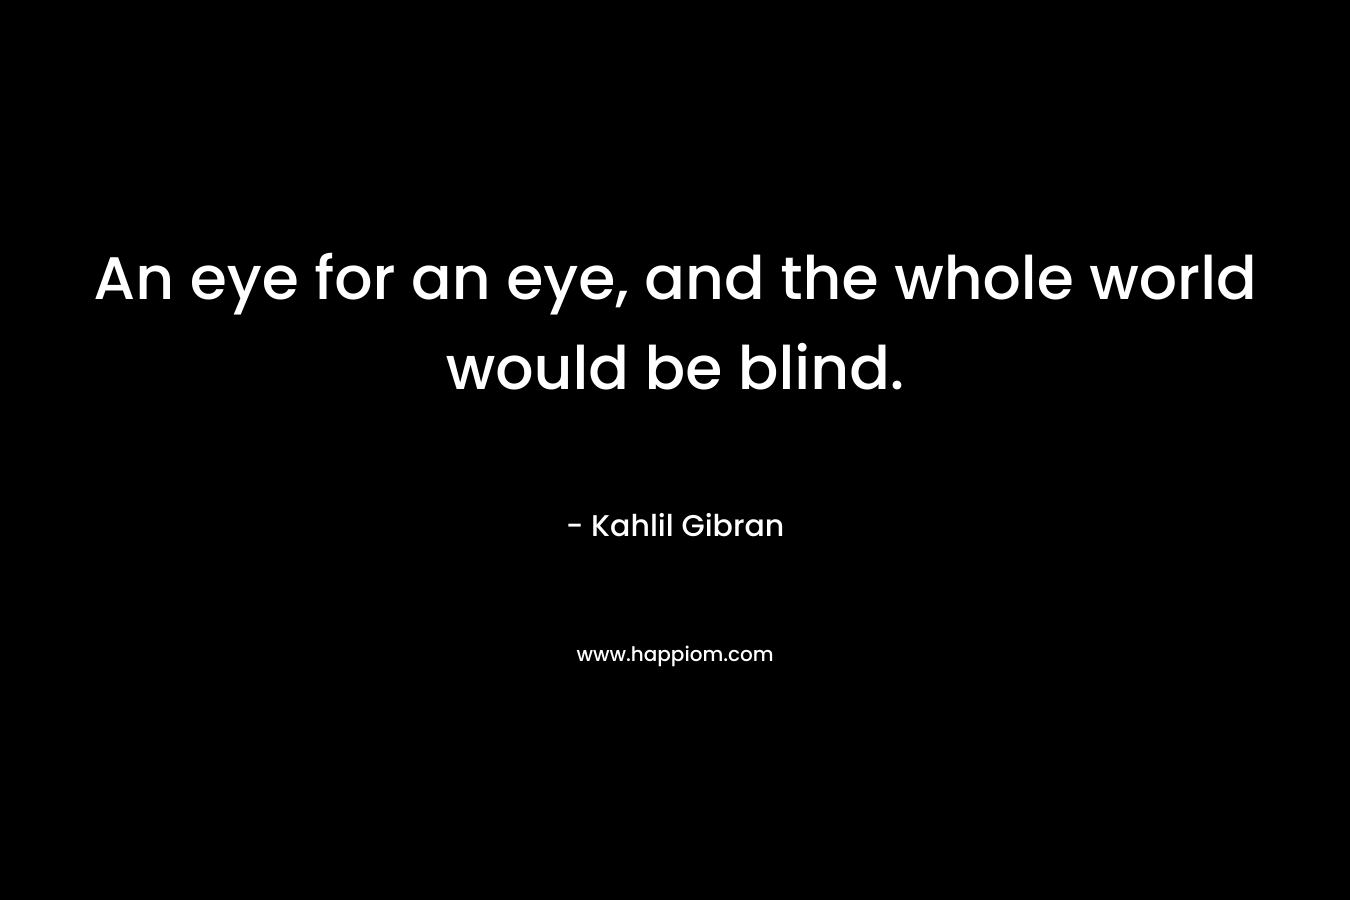 An eye for an eye, and the whole world would be blind.